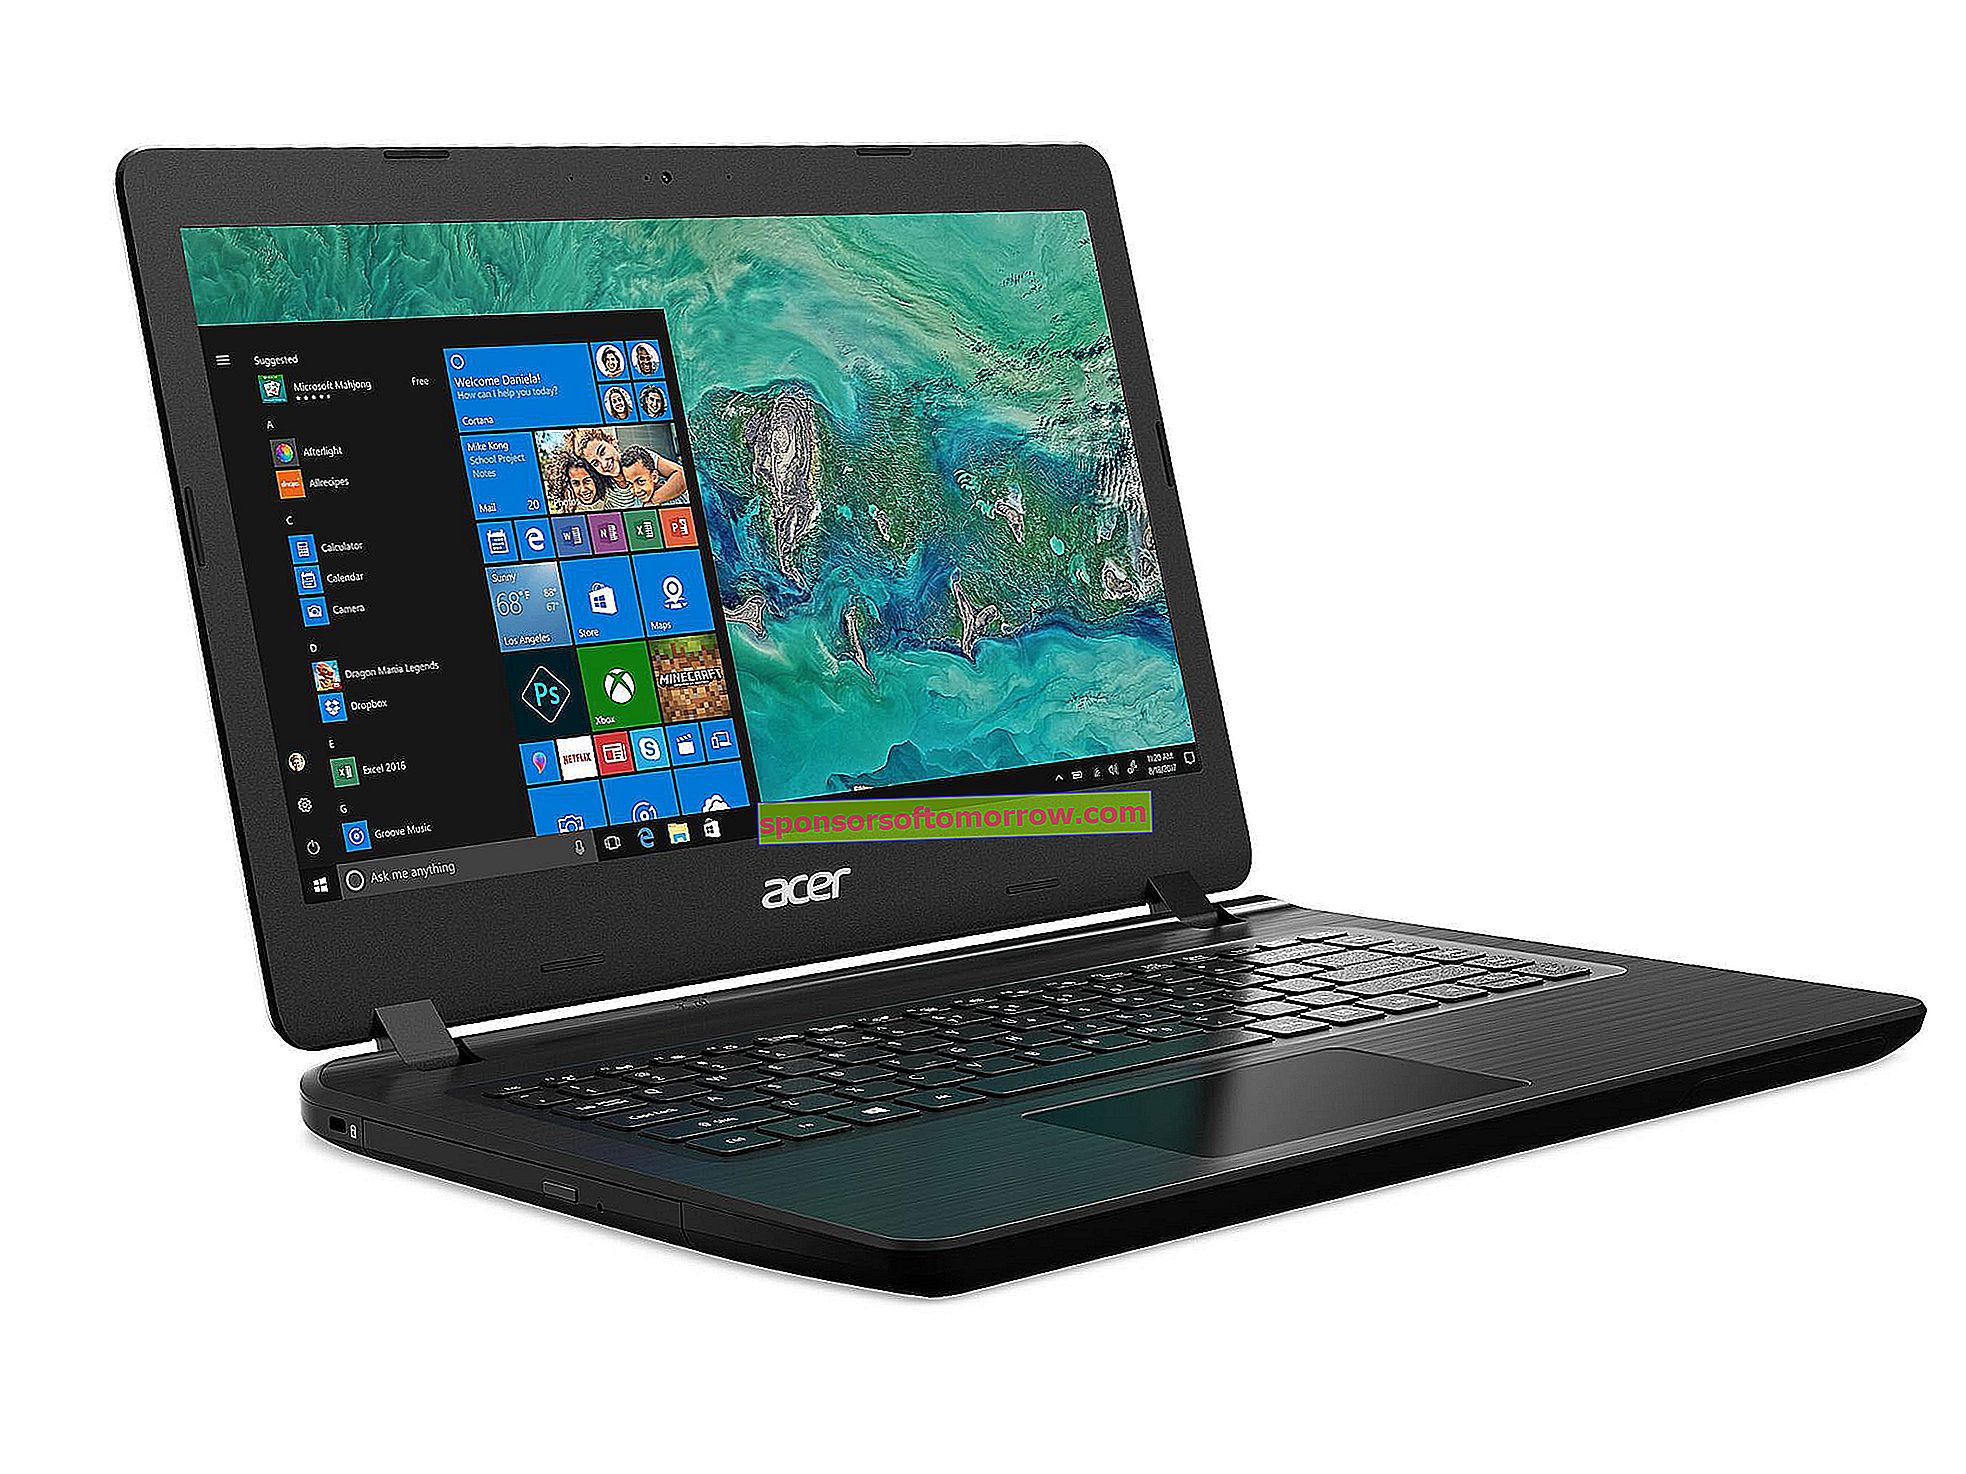 Acer Aspire 5 and Aspire 3, characteristics of these multimedia laptops